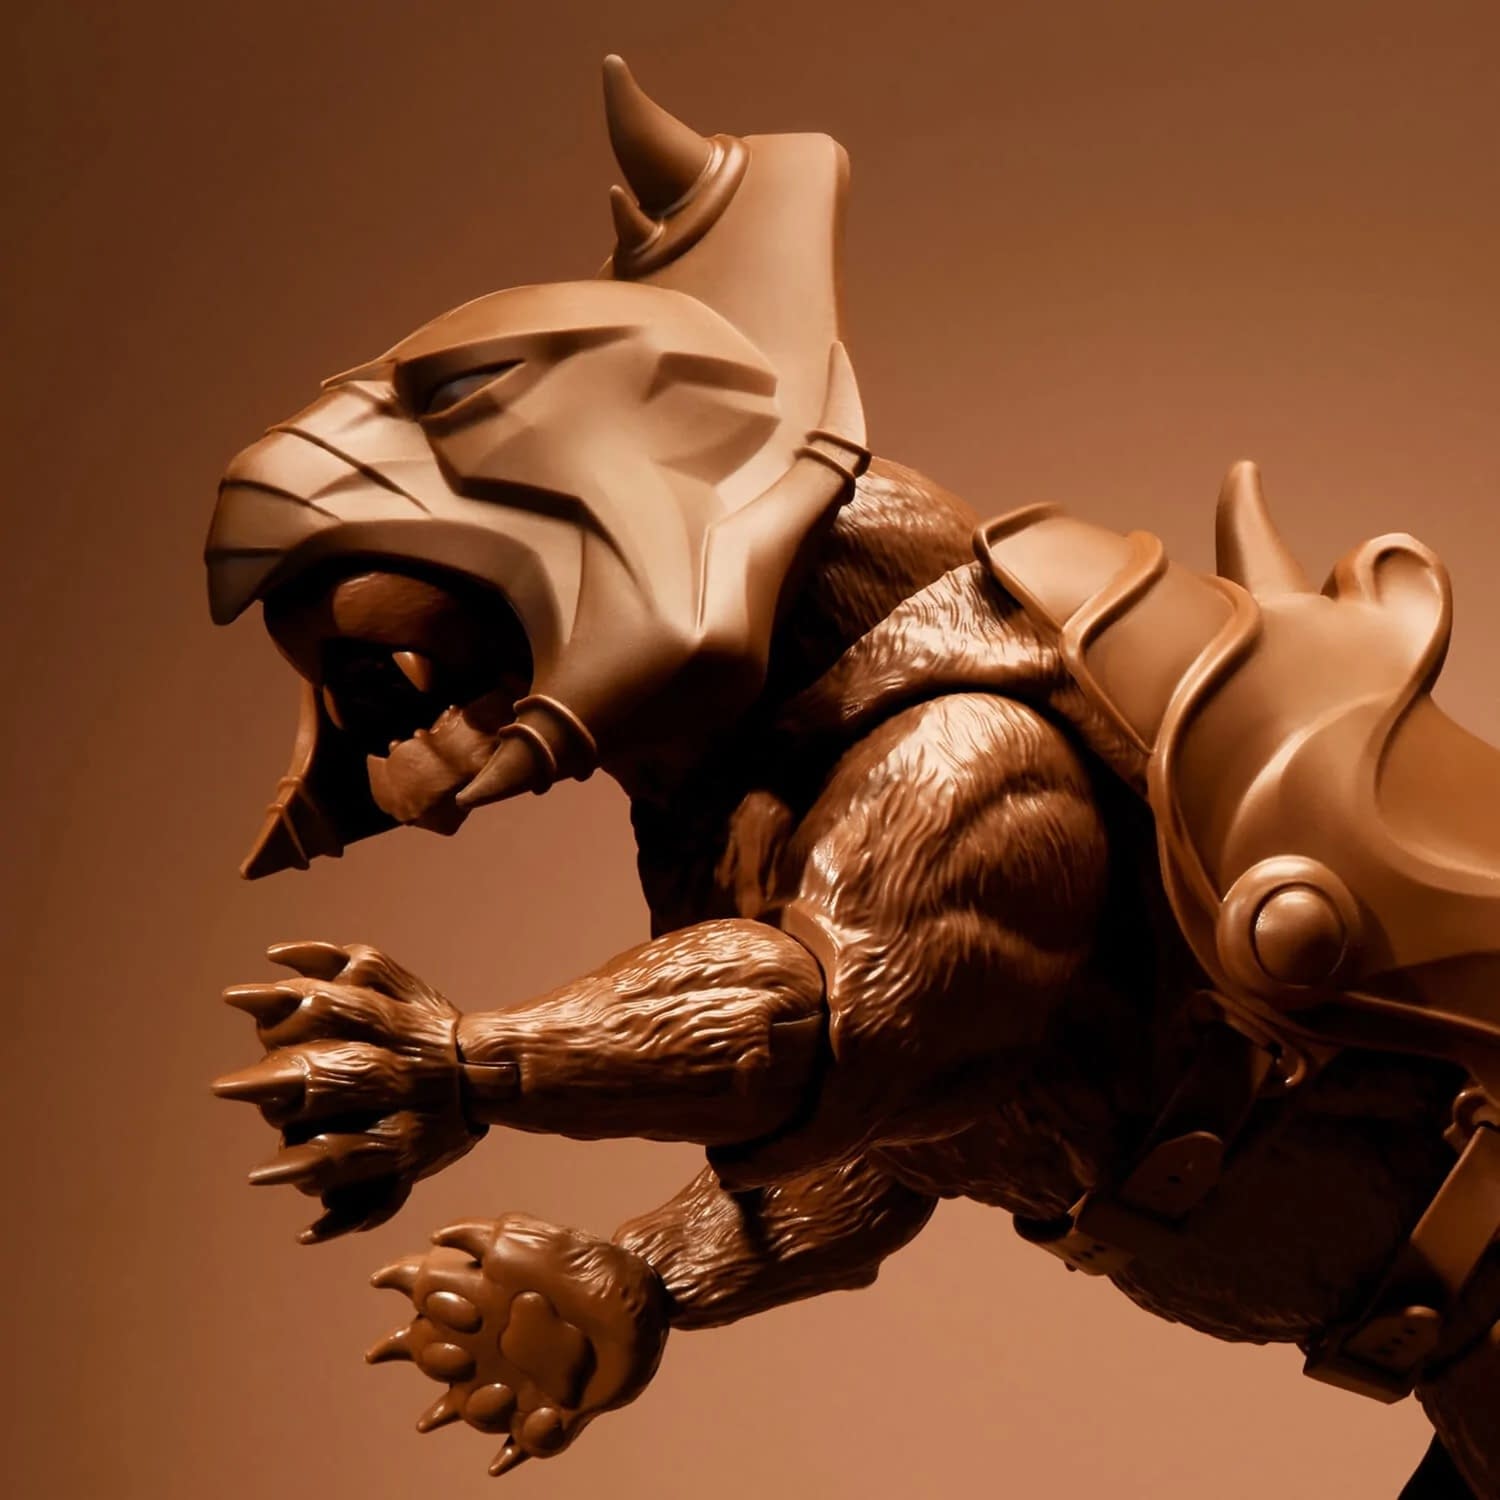 He-Man and Battle Cat Embrace the Chocolate with Mattel Creations